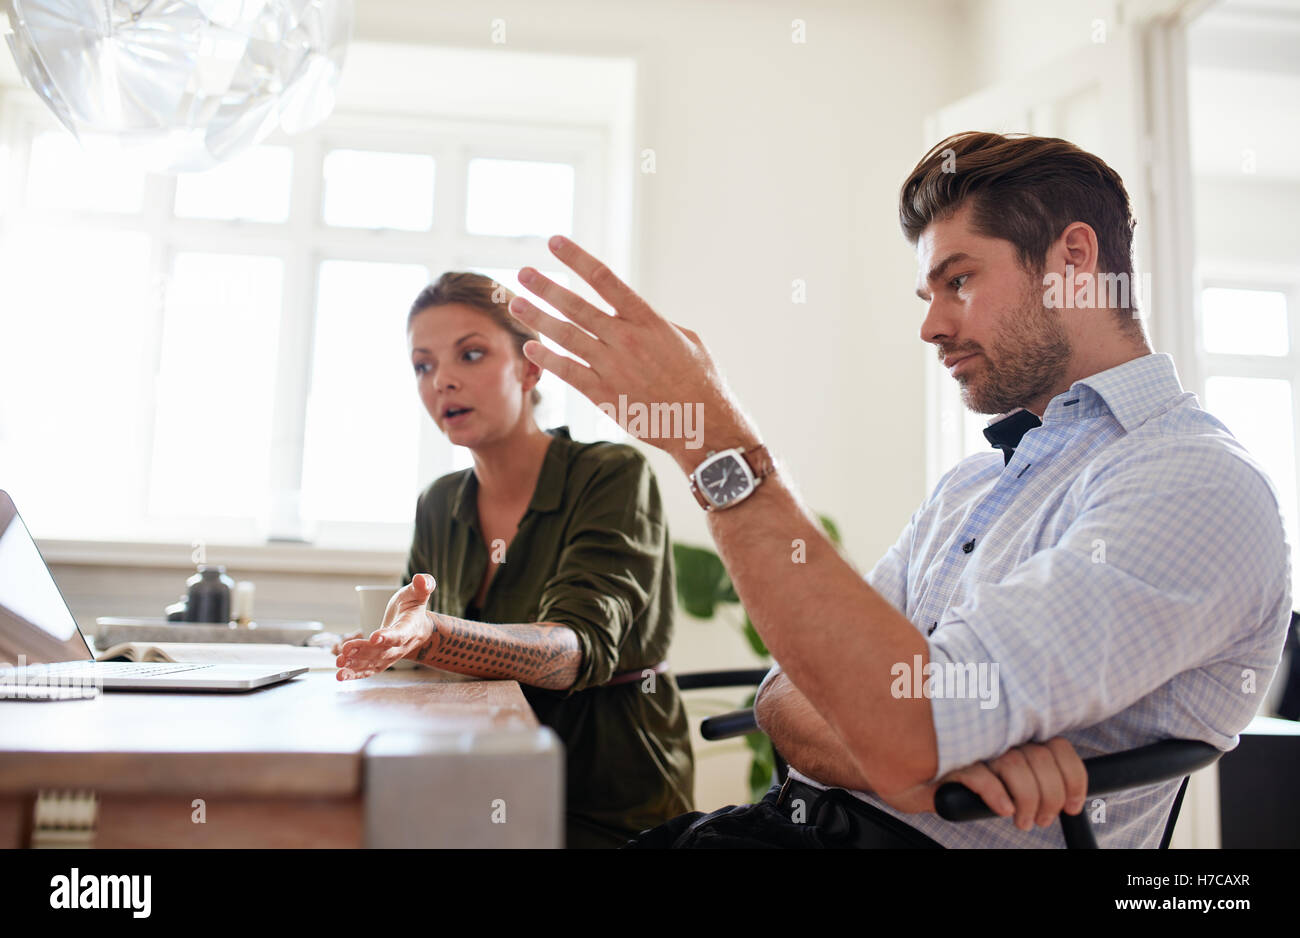 Shot of young couple sitting together at table with laptop and discussing work. Young man and woman working at home office. Stock Photo